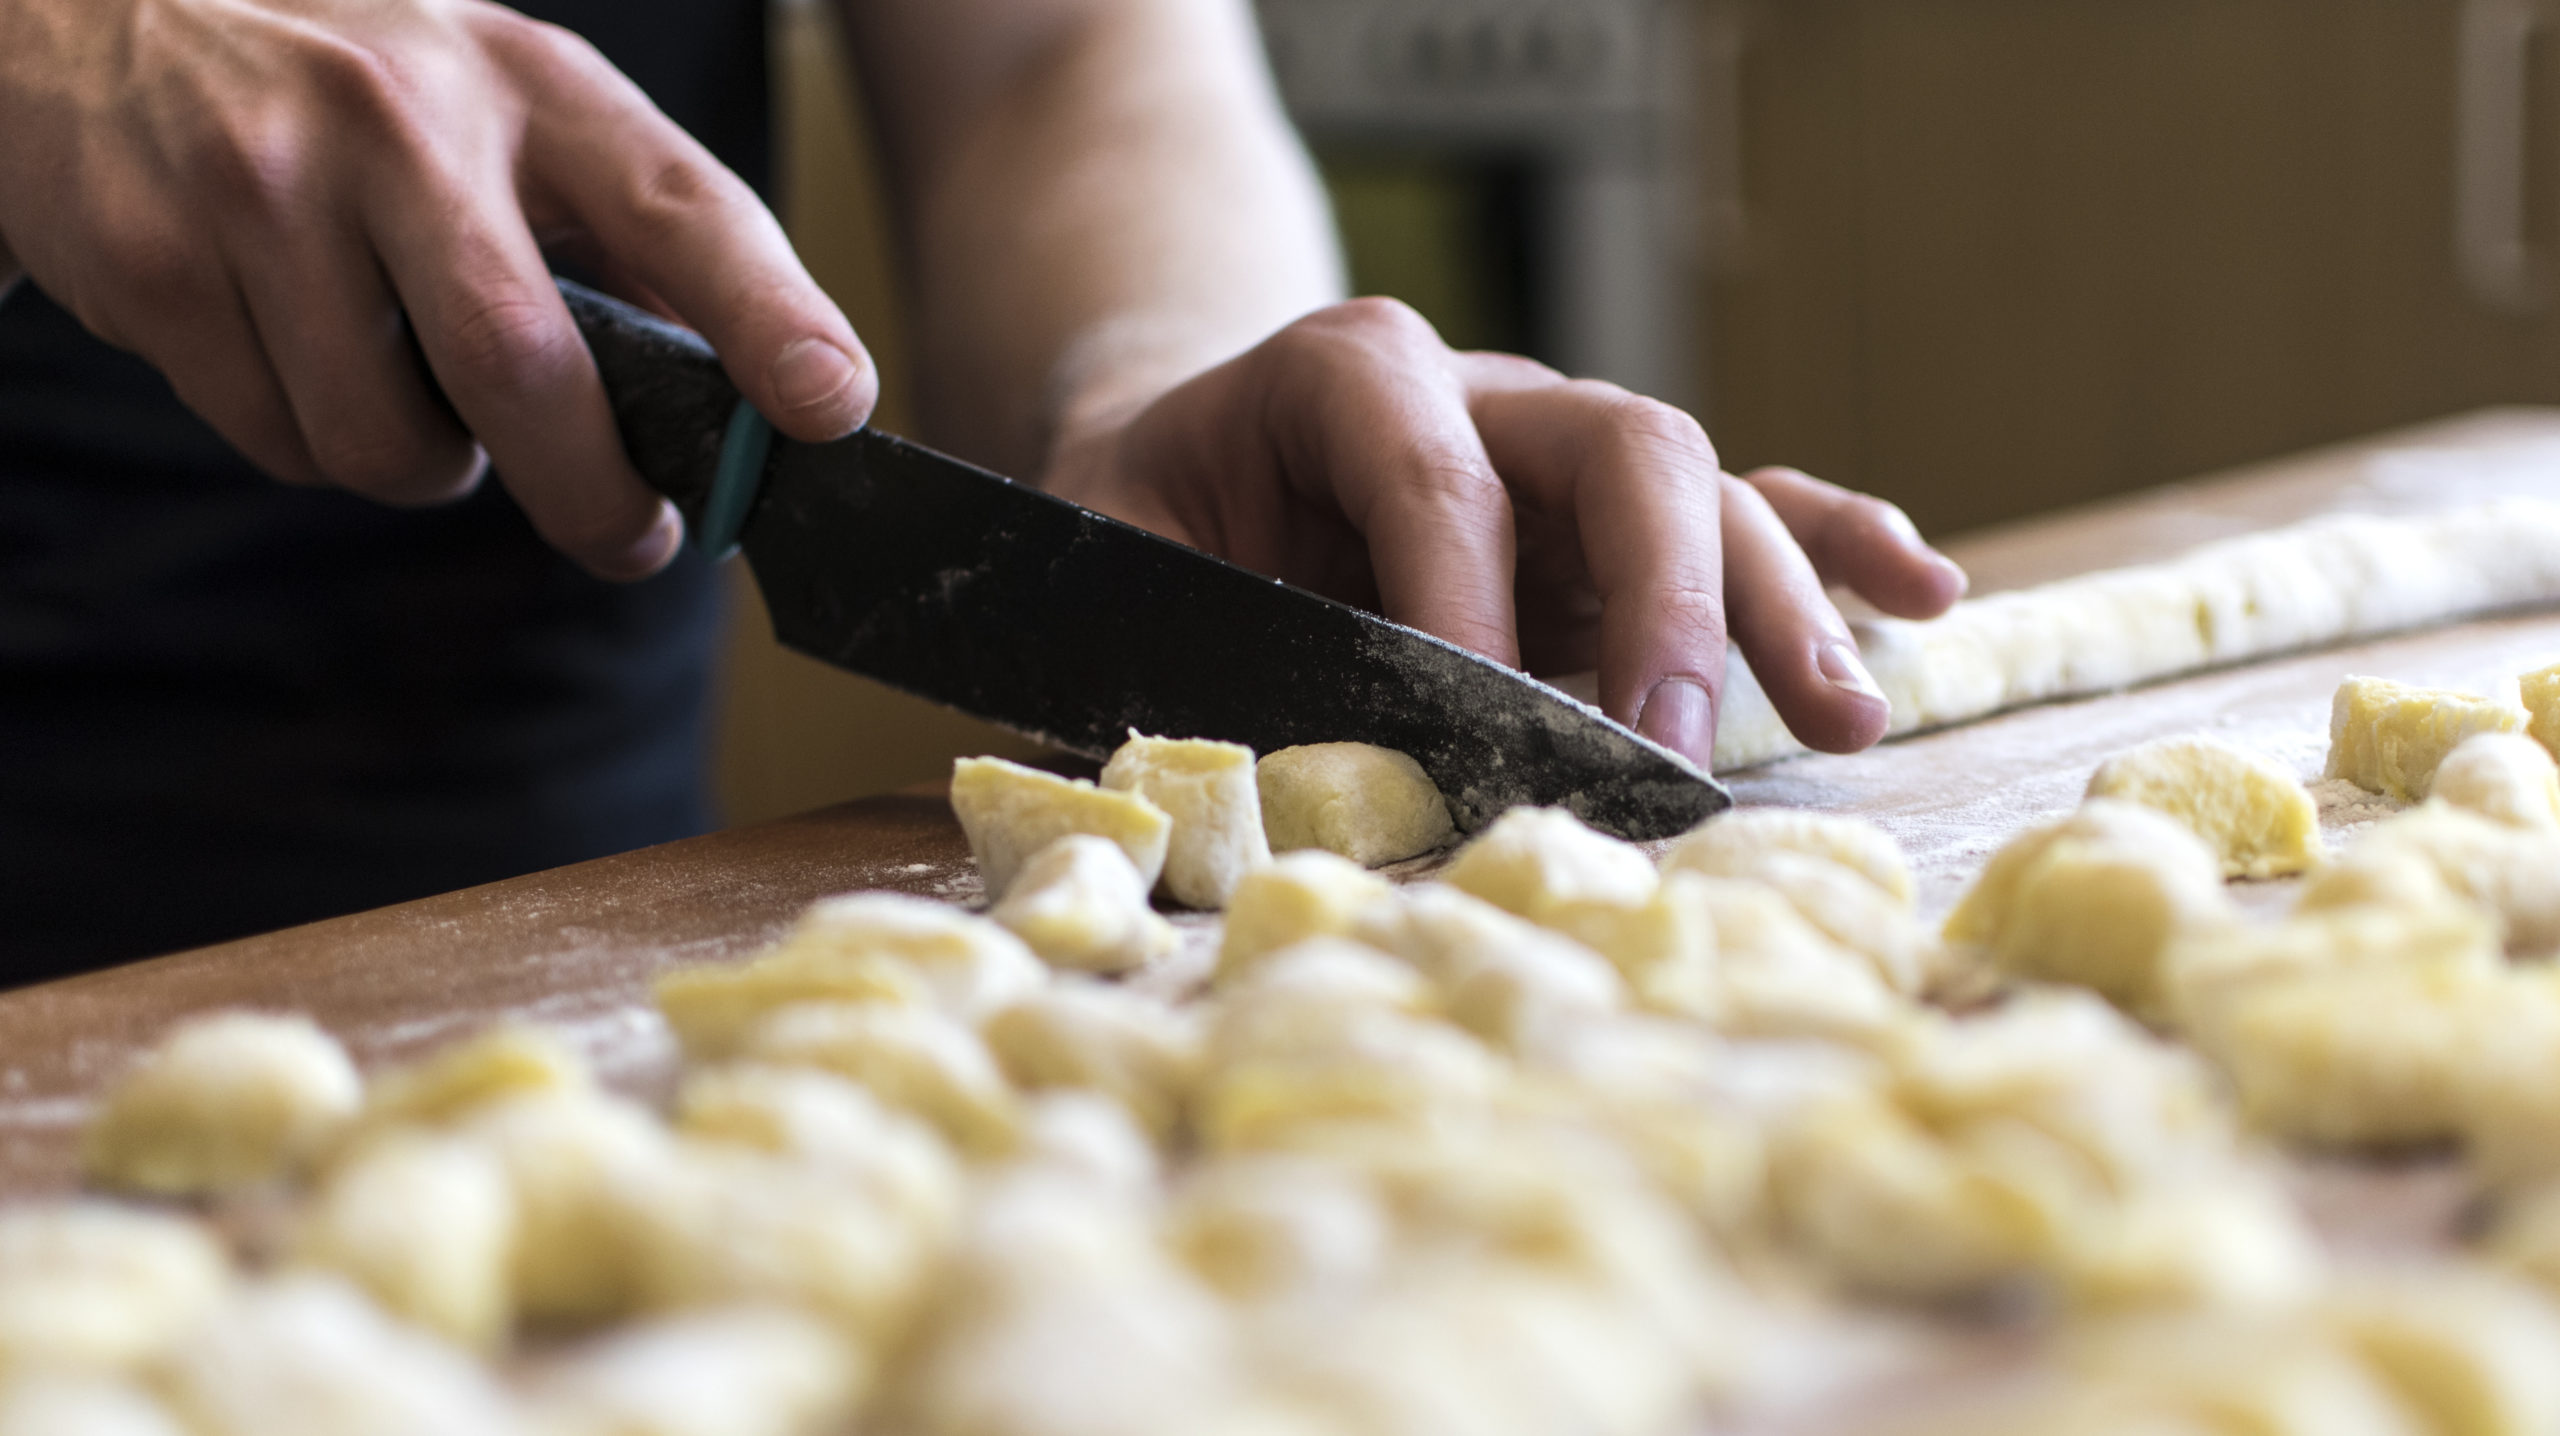 Make Quick and Easy ‘Gnocchi’ With Leftover Mashed Potatoes